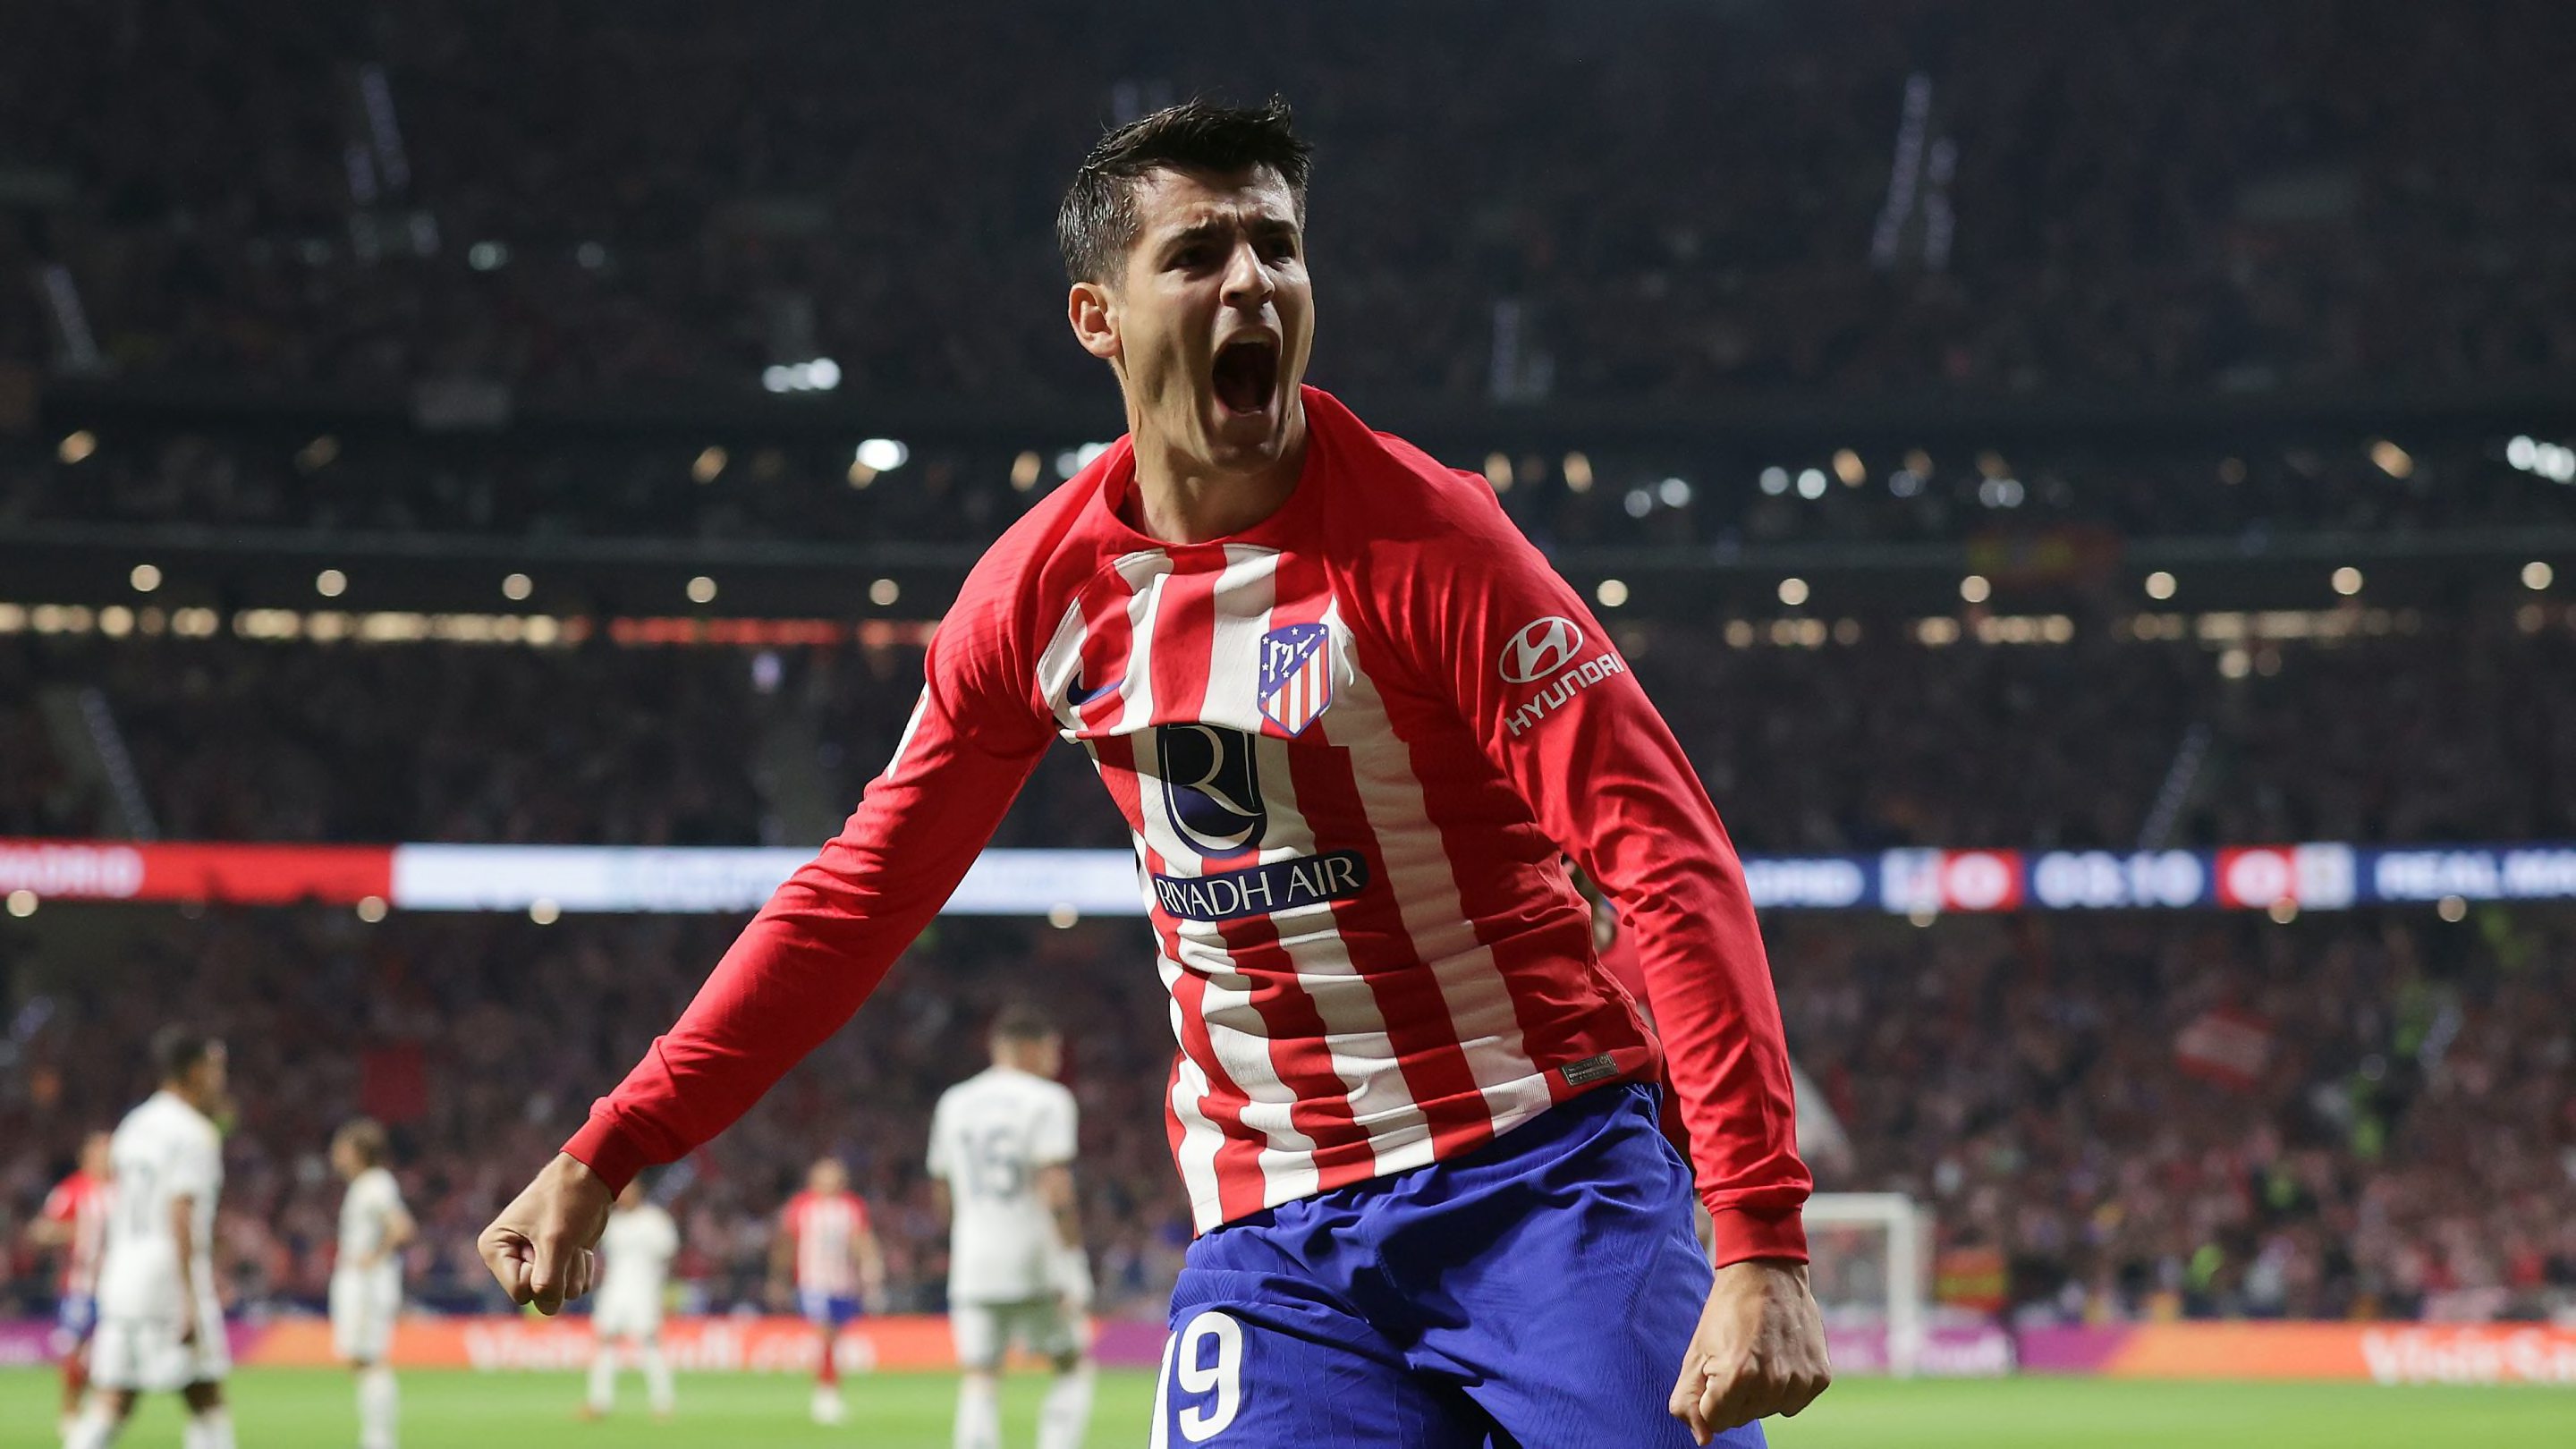 Atletico Madrid 3-1 Real Madrid: Player ratings as Bellingham suffers first La Liga defeat